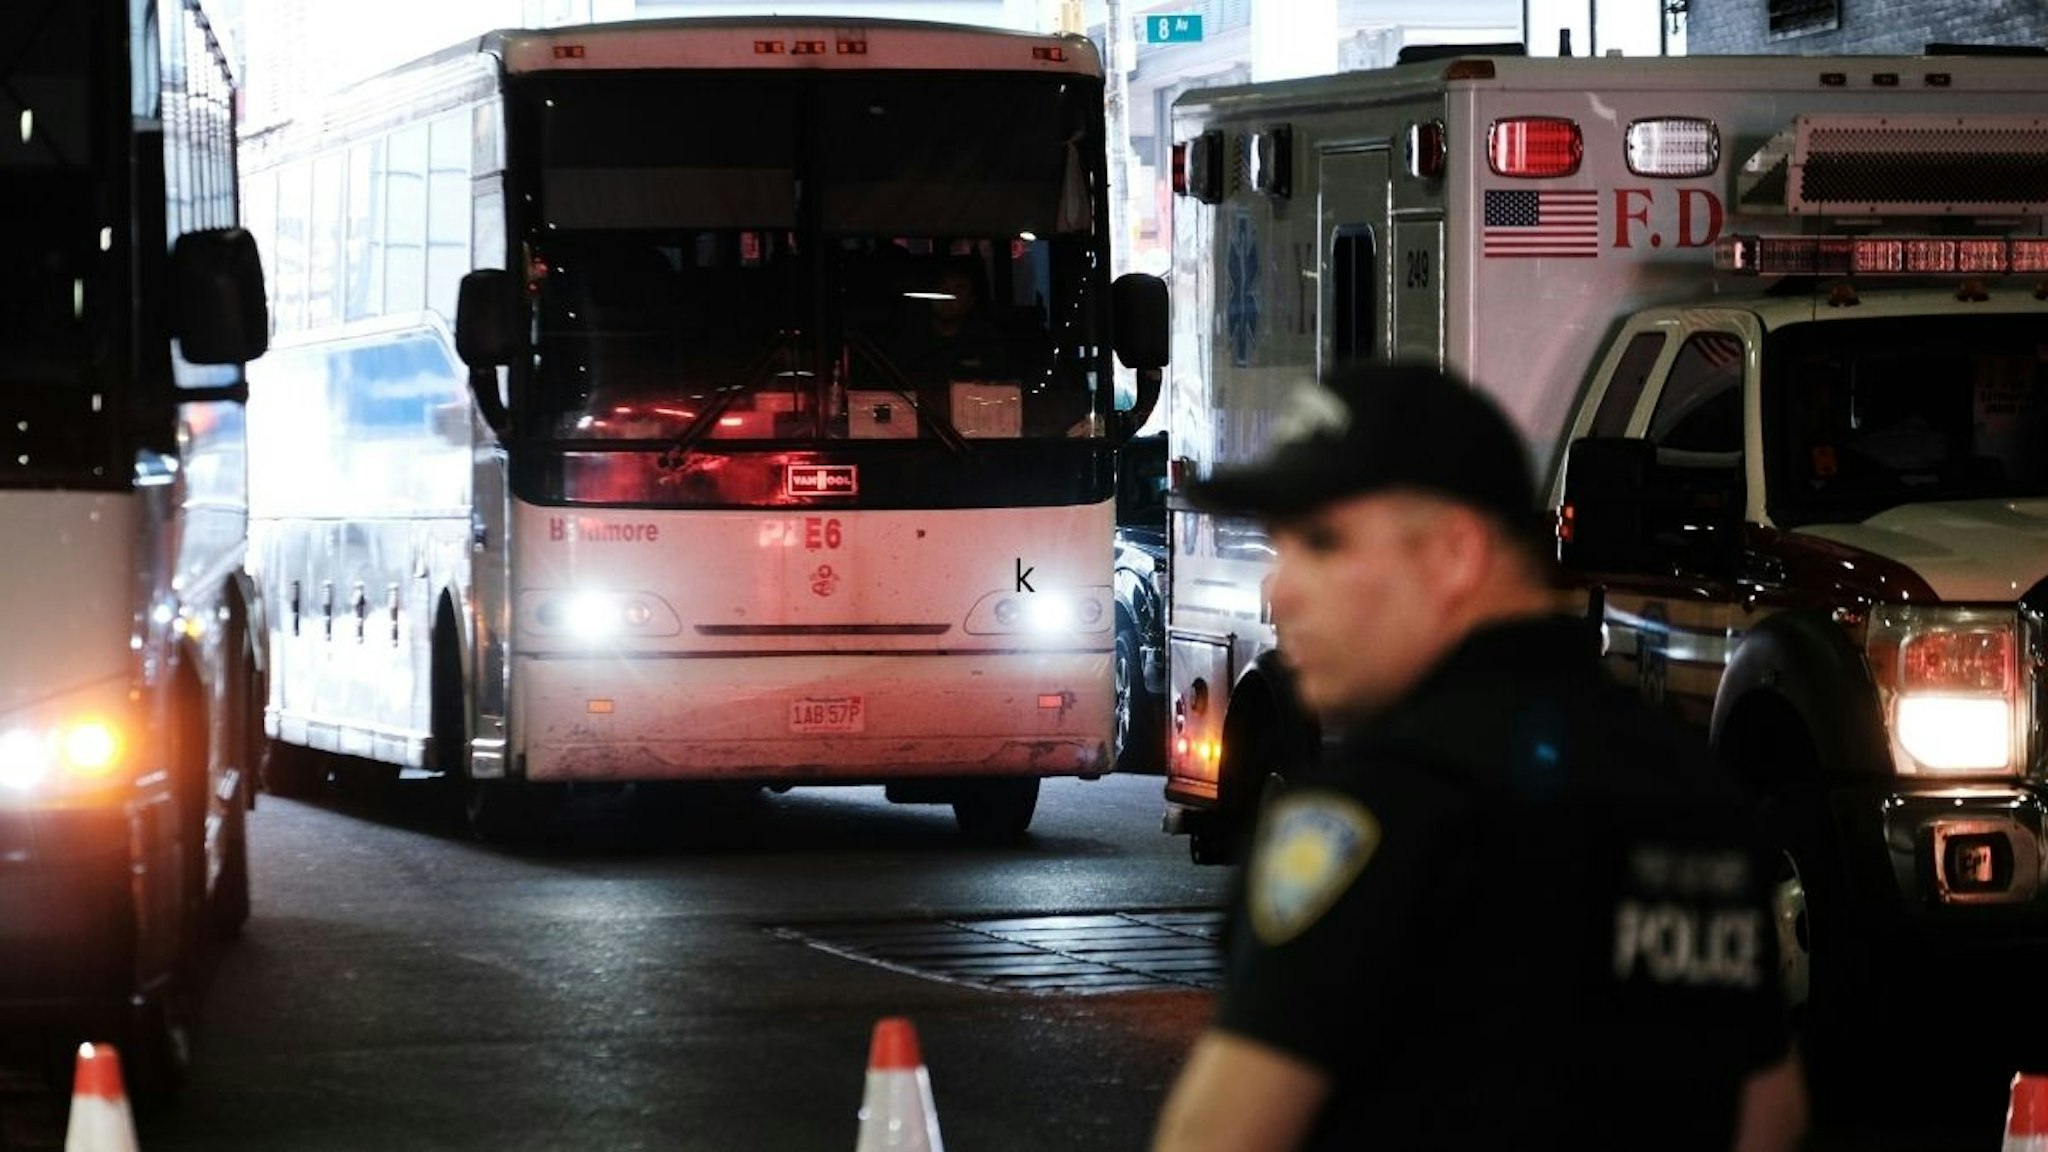 A bus carrying migrants who crossed the border from Mexico into Texas arrives into the Port Authority bus station in Manhattan on August 25, 2022 in New York City.